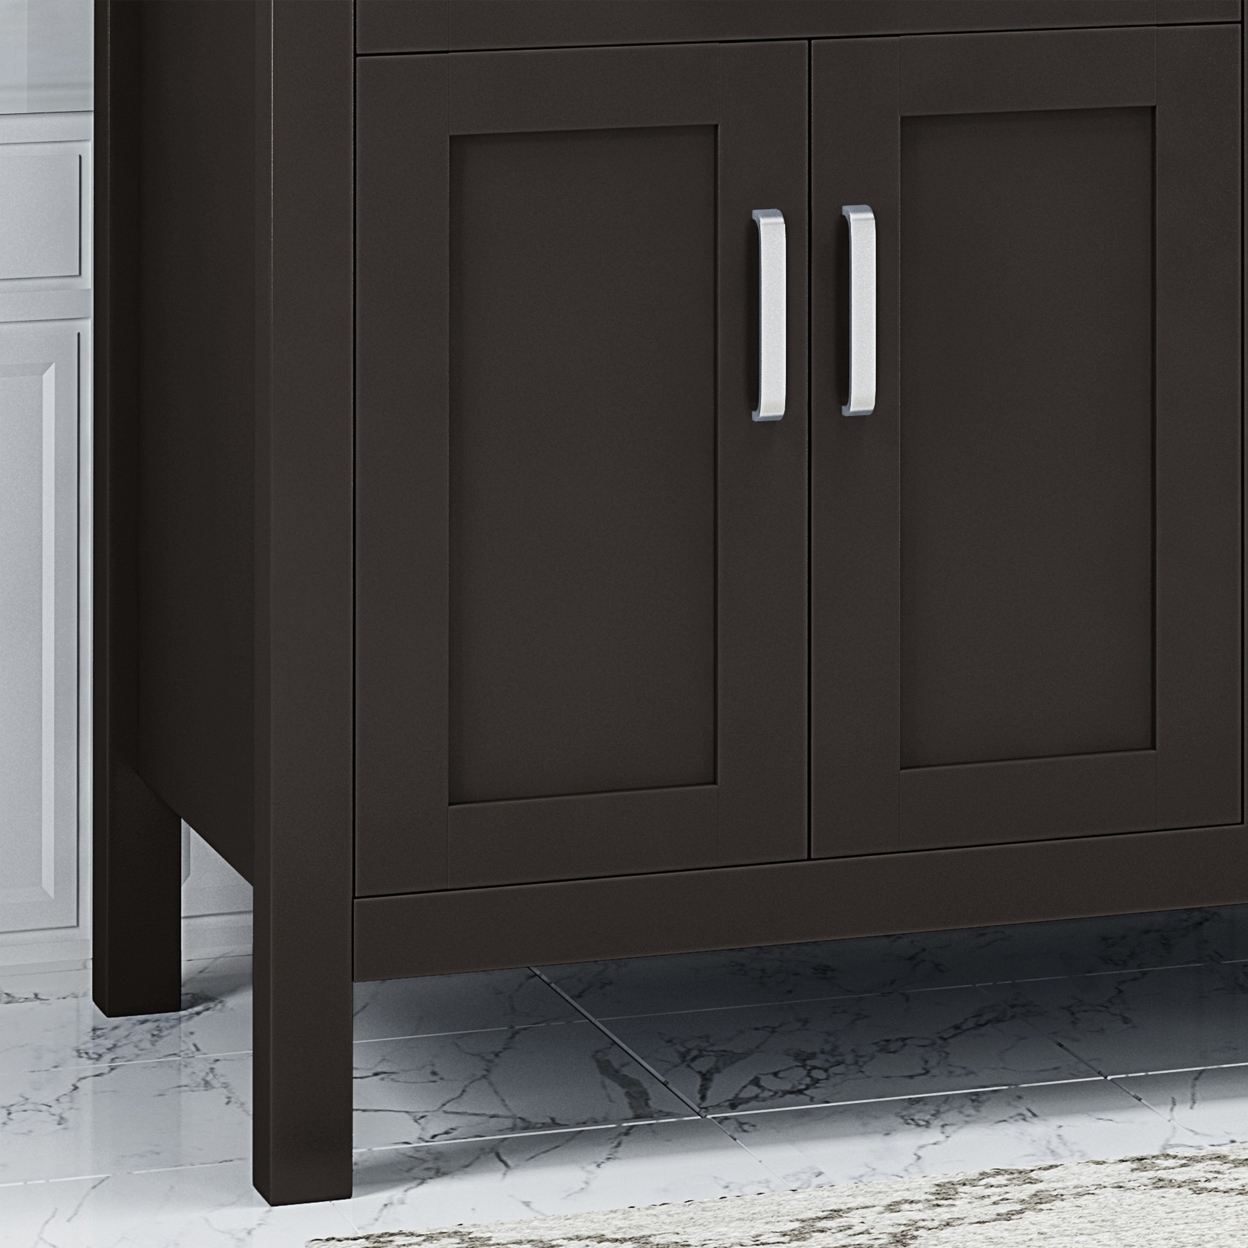 Greeley Contemporary 60 Wood Bathroom Vanity (Counter Top Not Included) - White